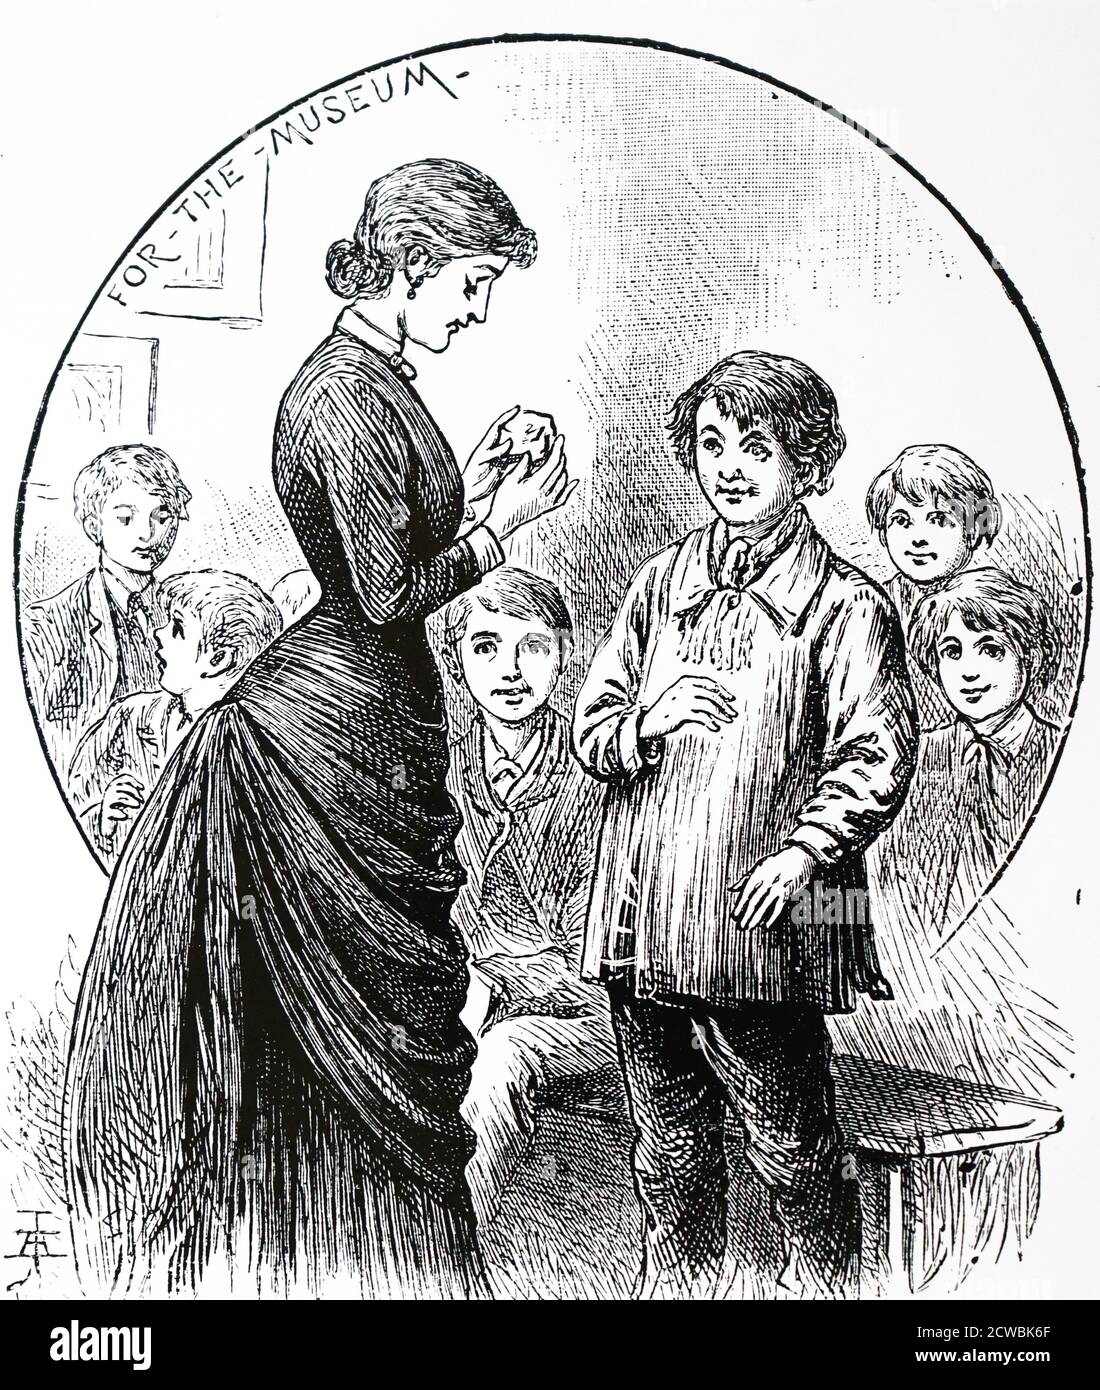 Engraving depicting a boy presenting a geological specimen for the school collection. Classes were held once a week and, as well as the 3Rs, included Natural History, Drawing, Literature, Music and Needlework. Stock Photo